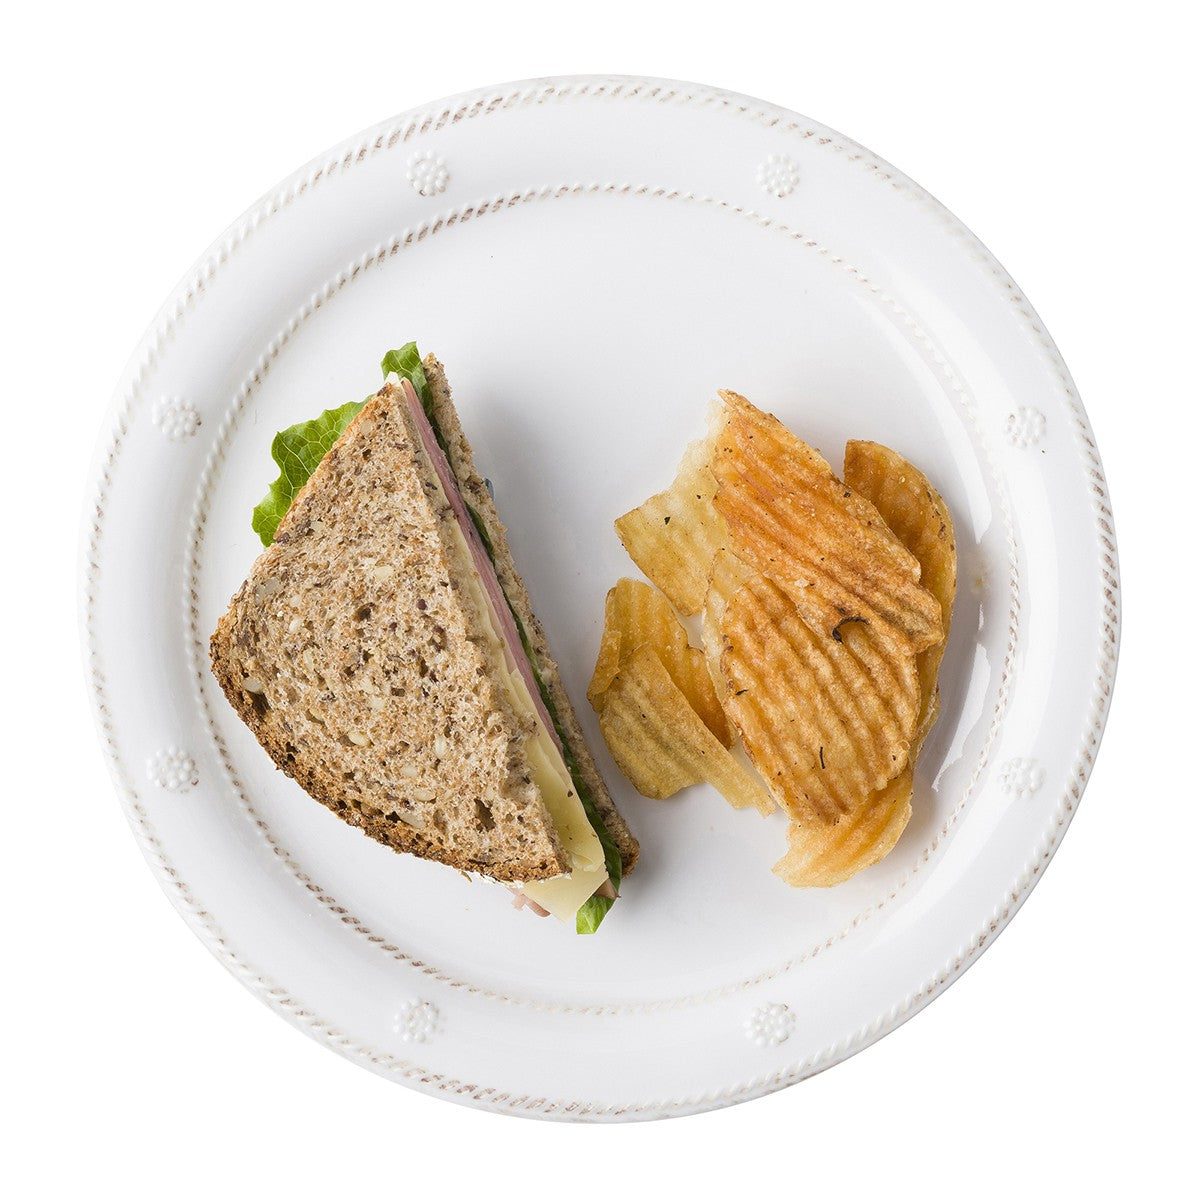 berry and thread melamine salad plate displayed with a sandwich and chips on a white background